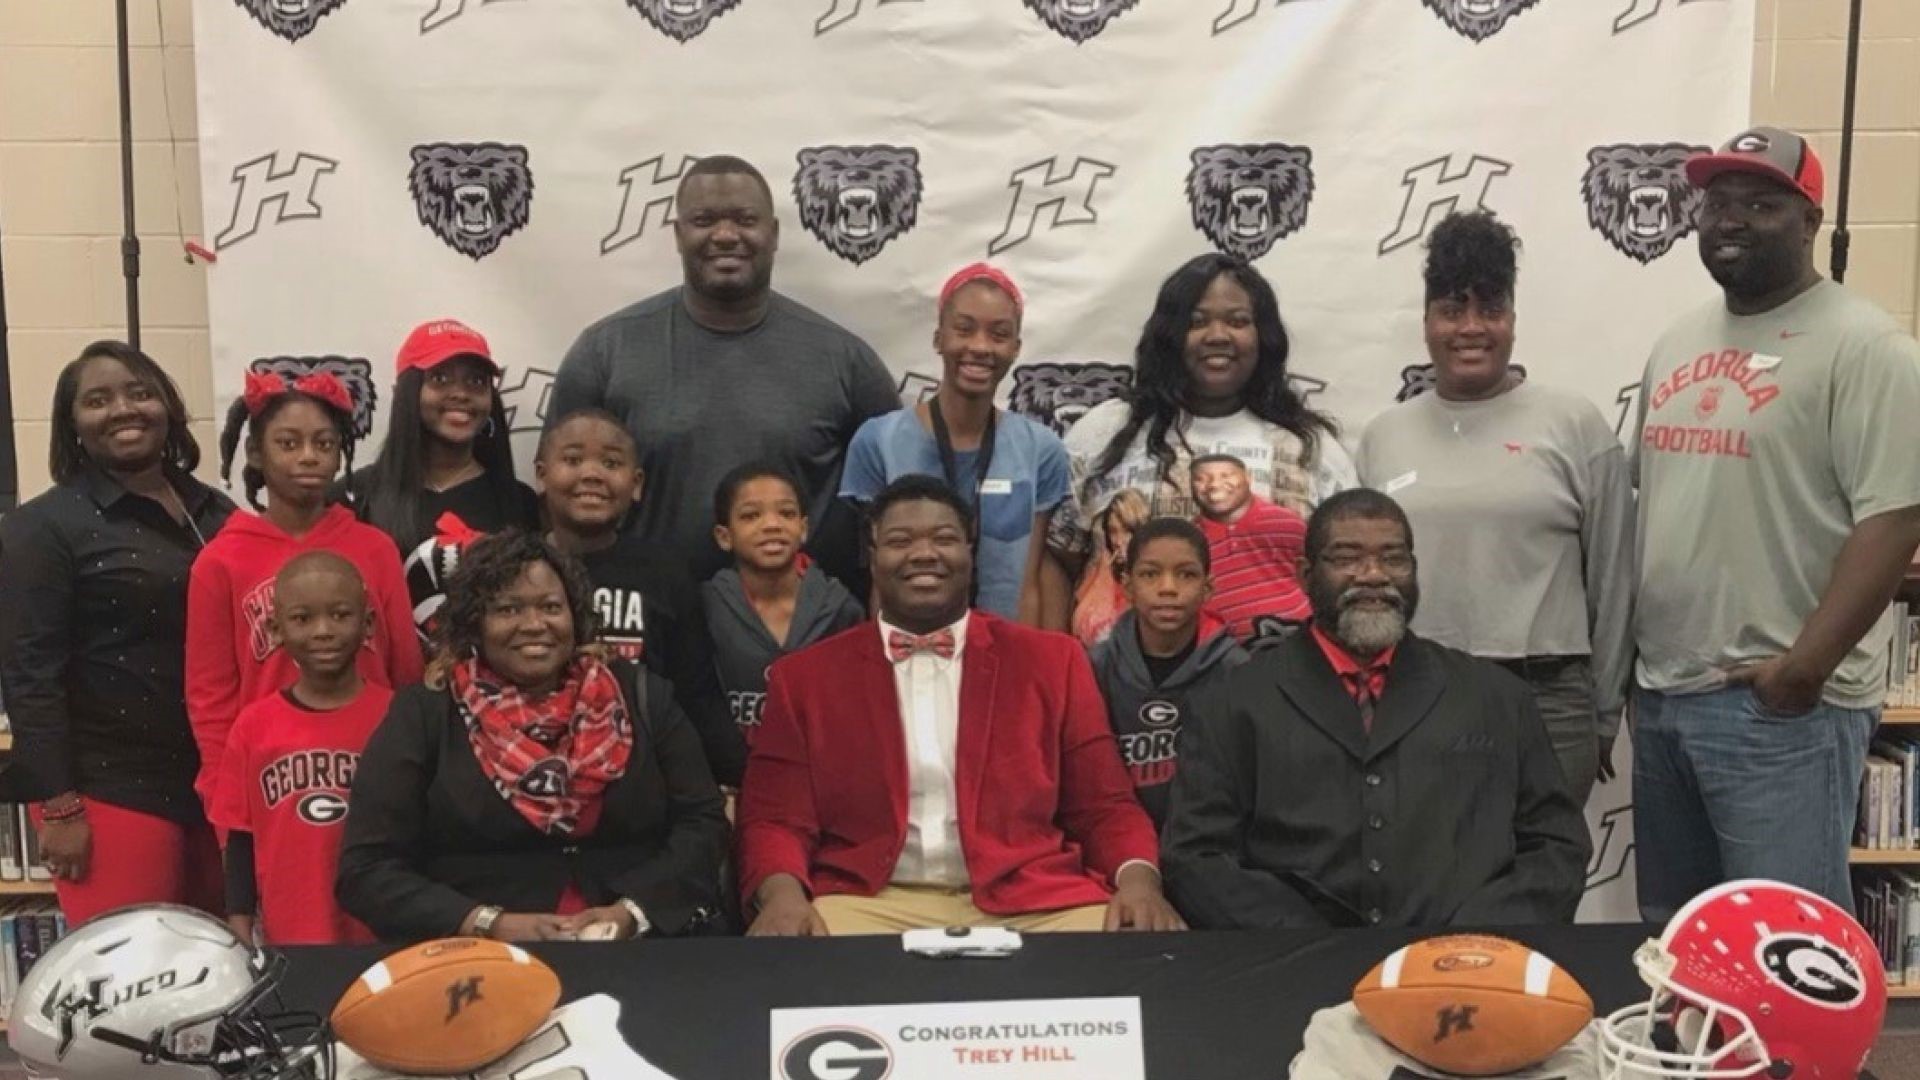 The beginning of UGA center Deontrey "Trey" Hill's story is unlike most.